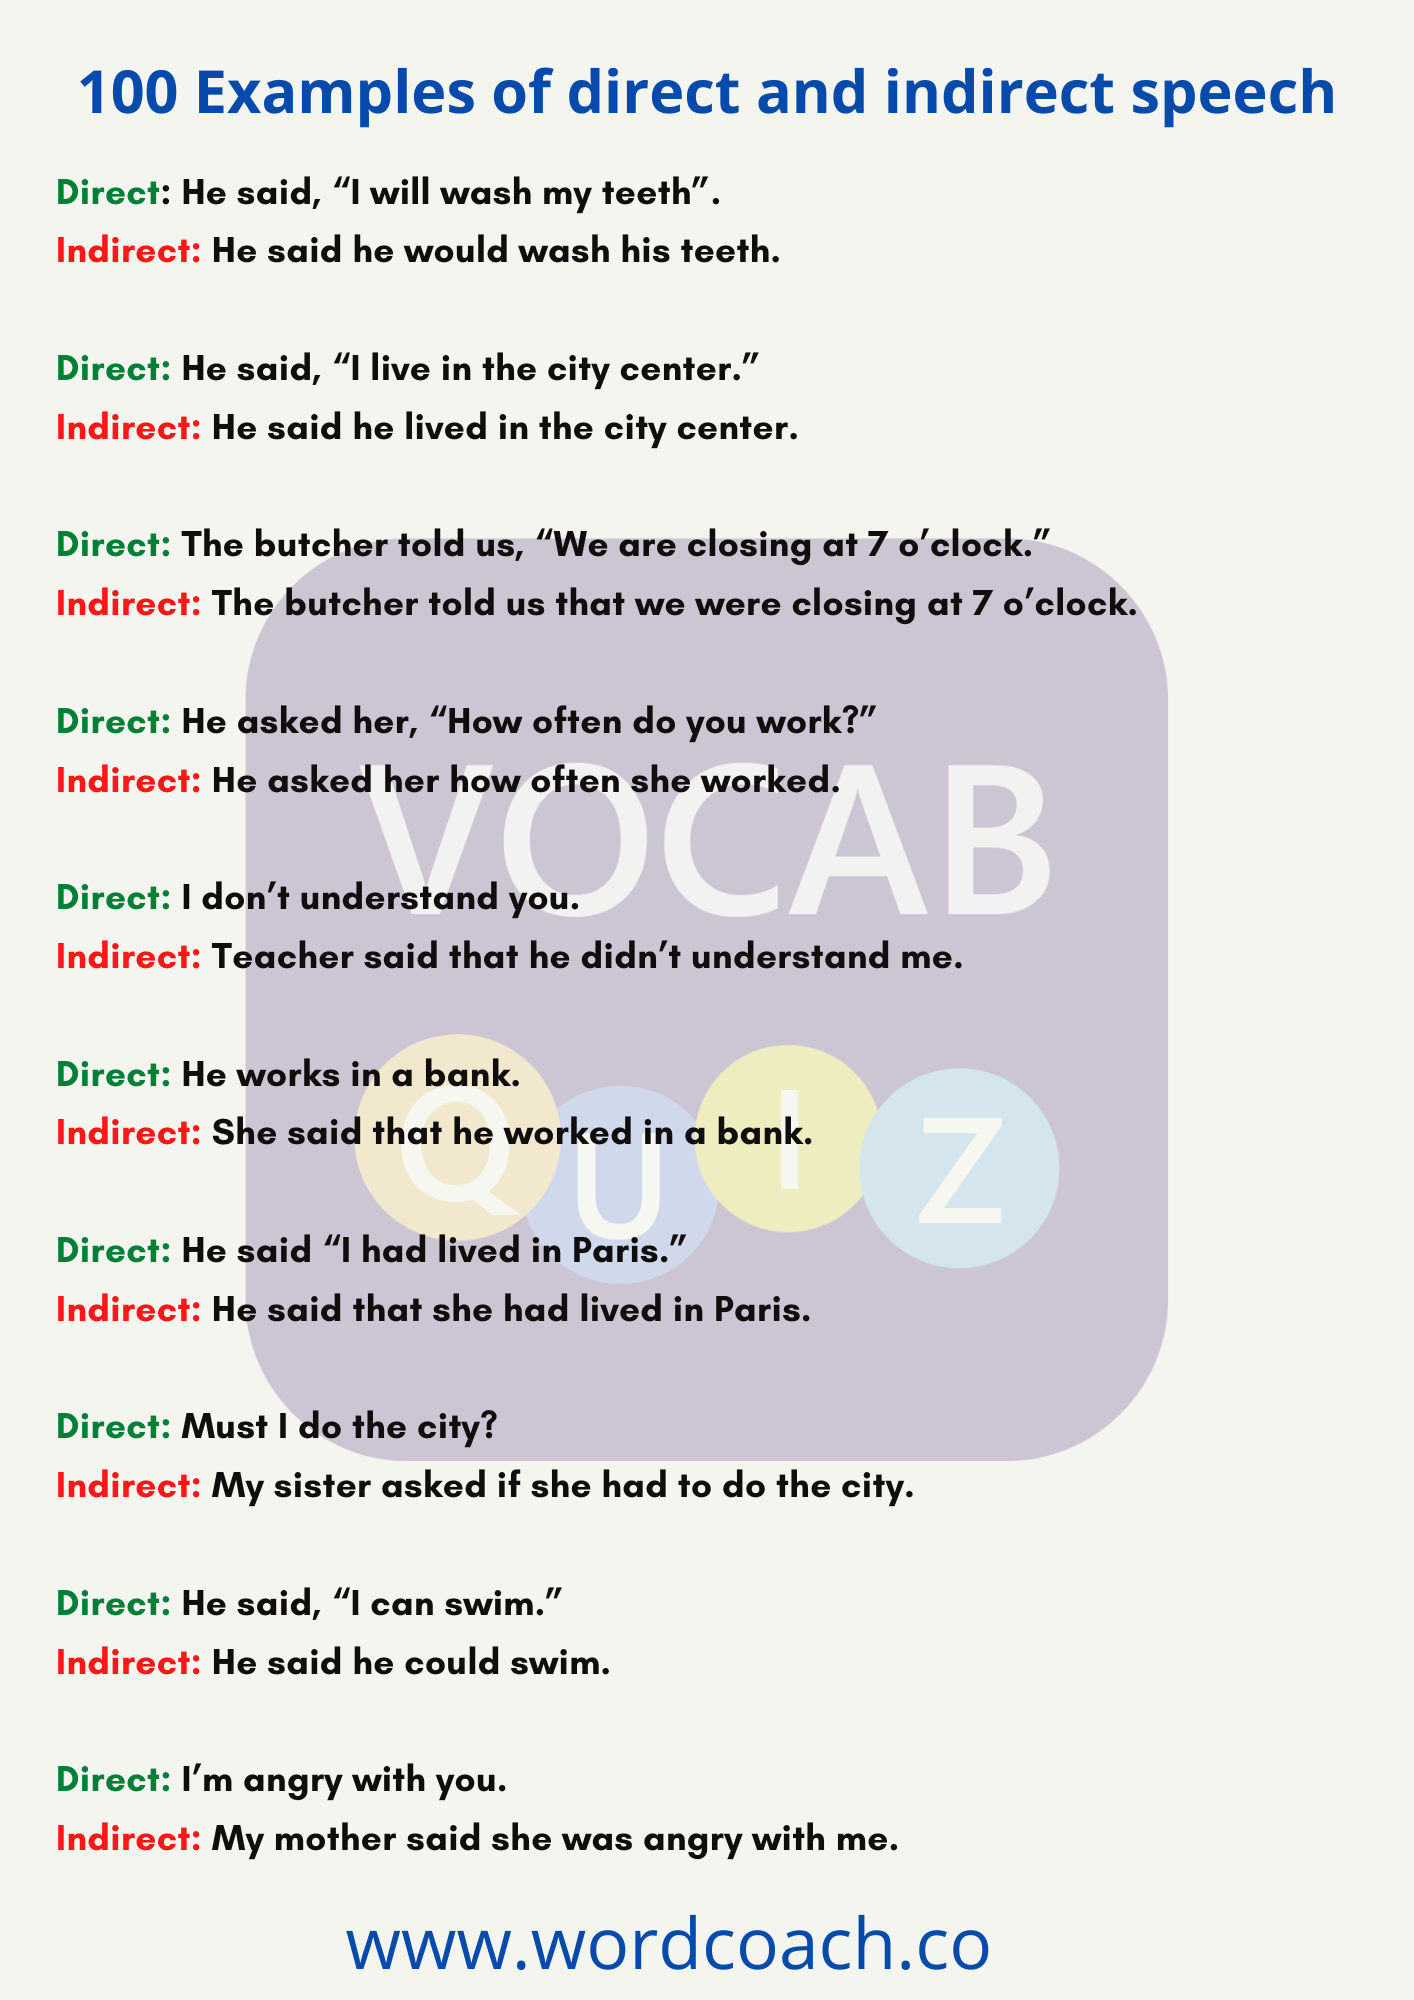 100 Examples of direct and indirect speech - wordcoach.co